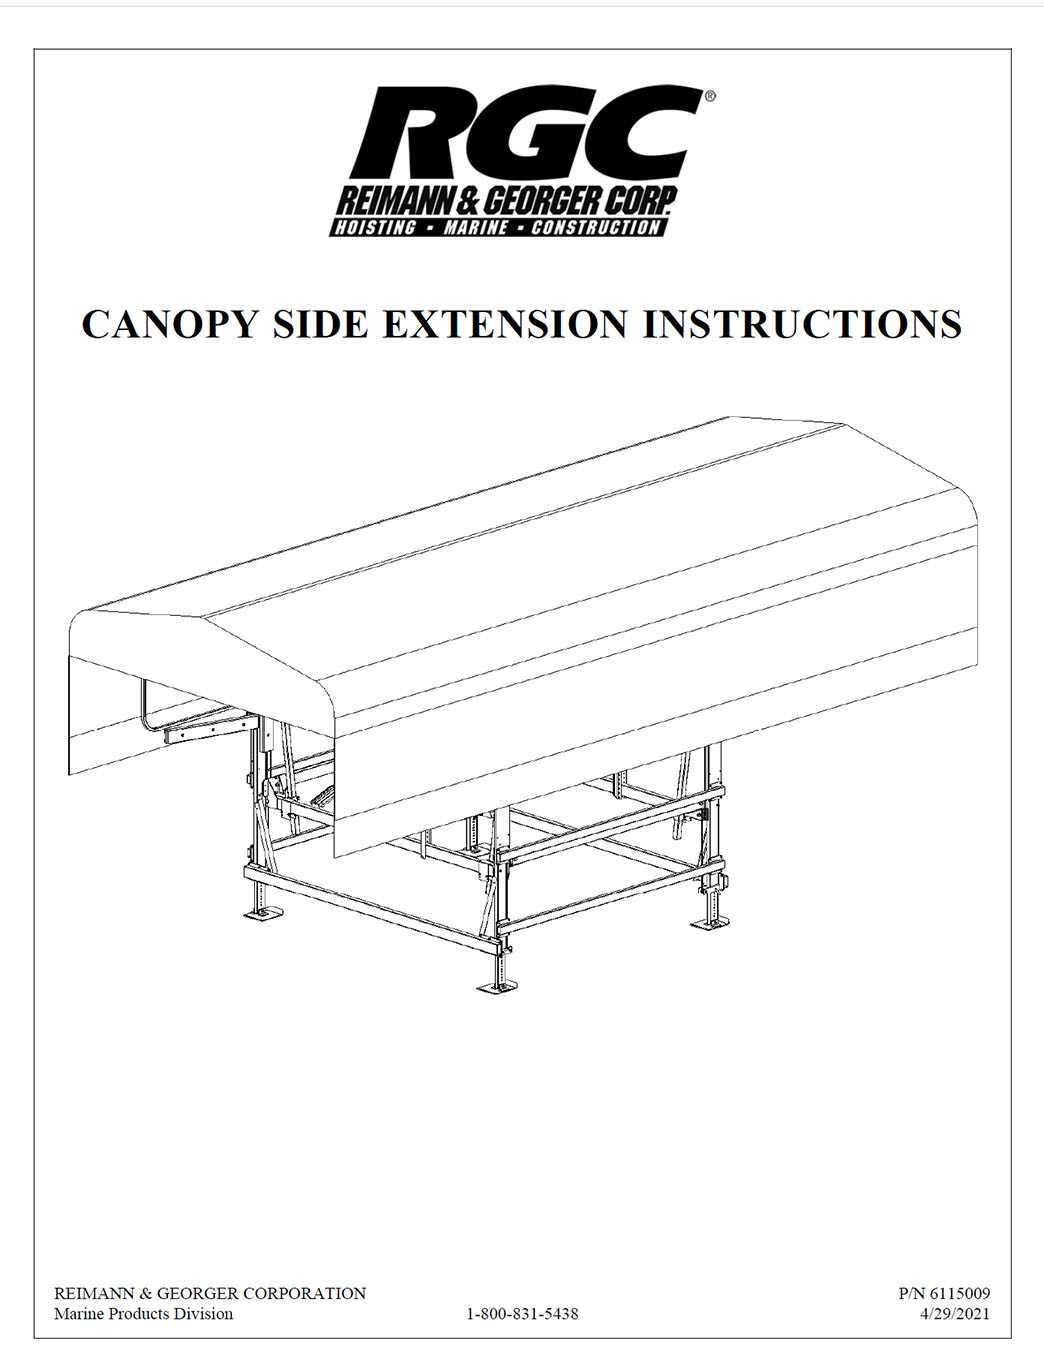 Canopy Side Extension Instructions